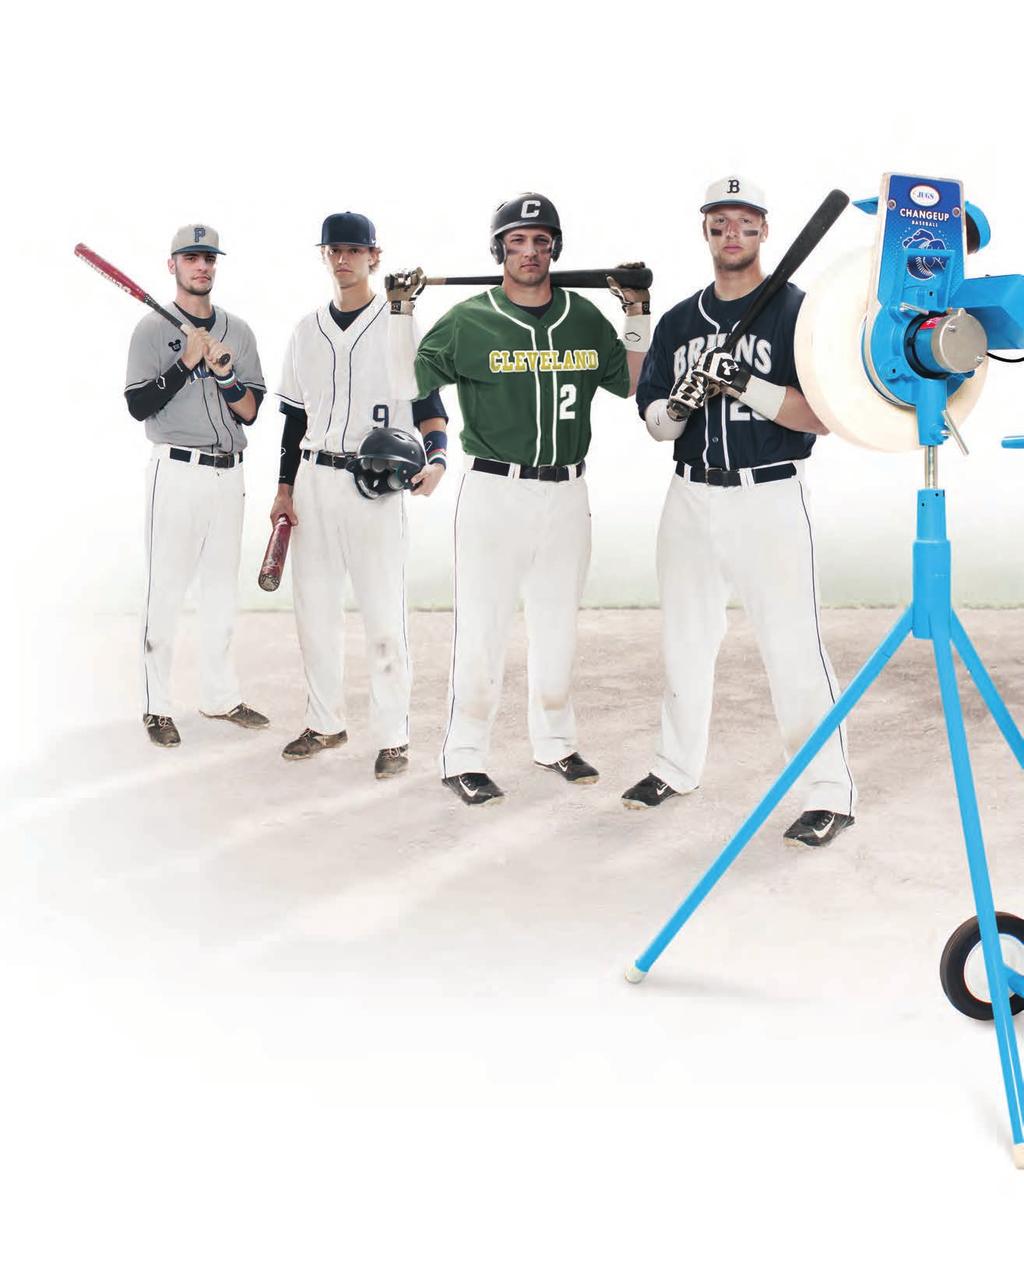 Revolutionizing the game, one pitch at a time. Batting practice isn't automatic anymore!